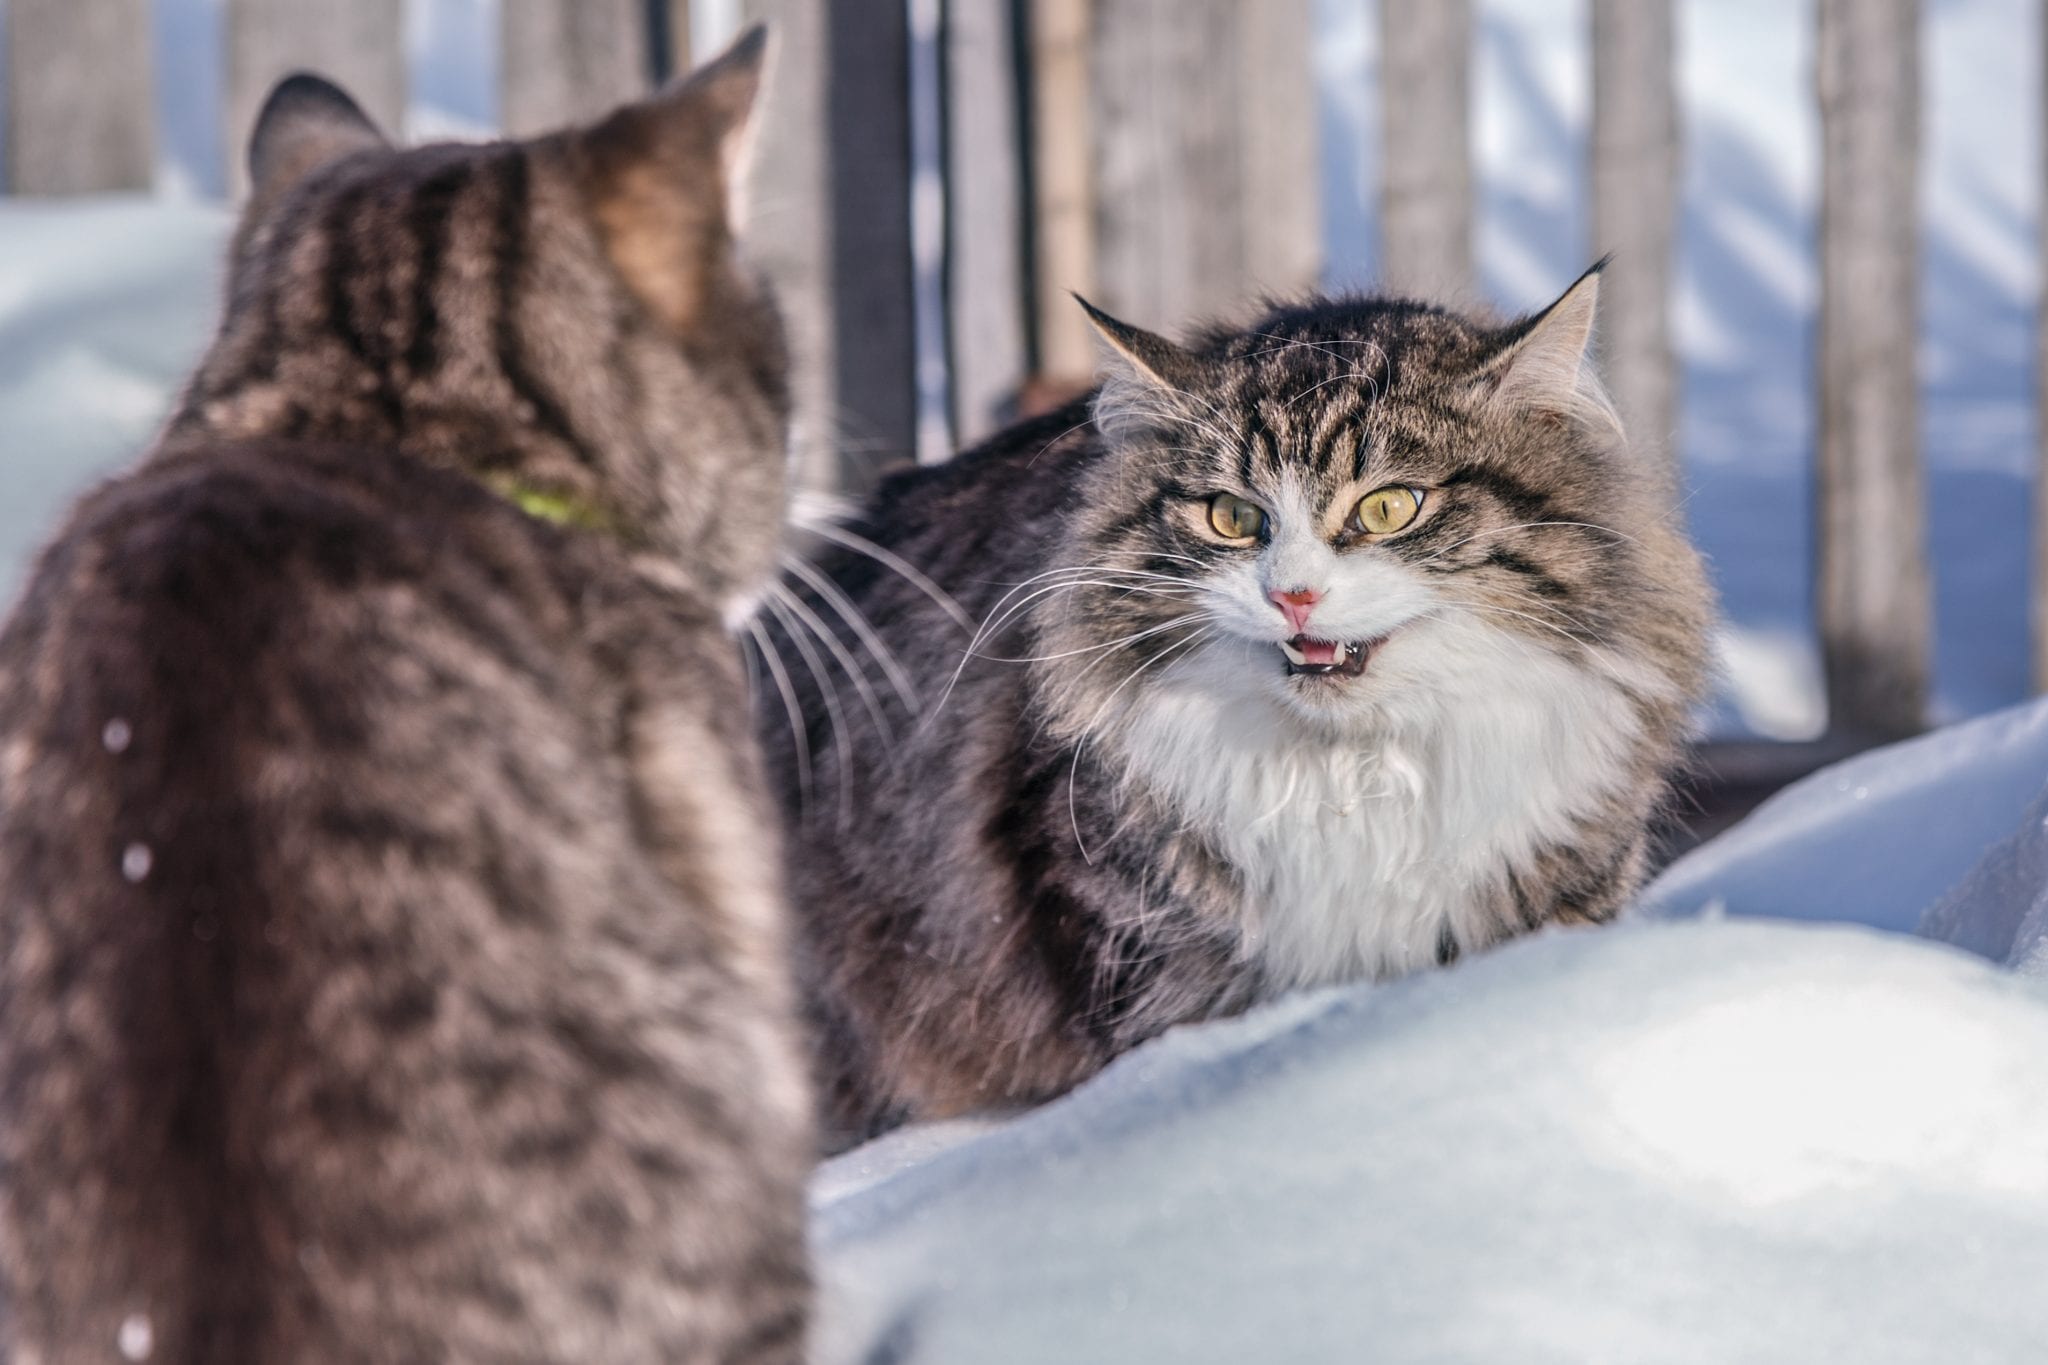 3 Ways to Capture an Angry or Upset Cat - wikiHow